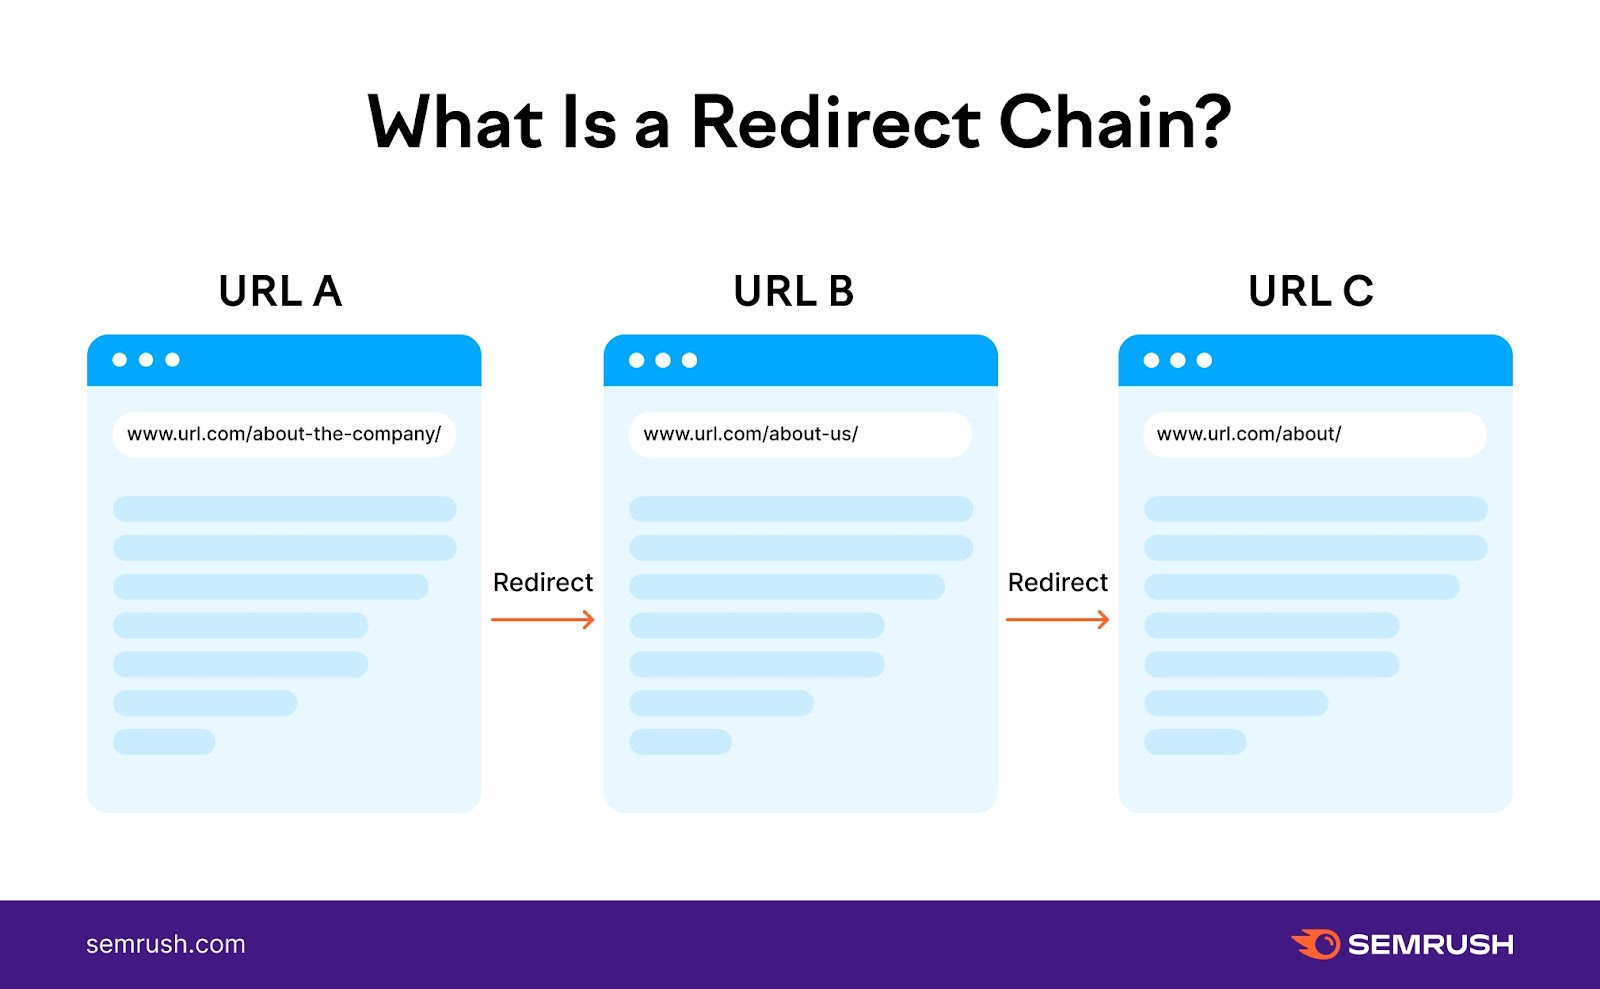 What is a redirect chain